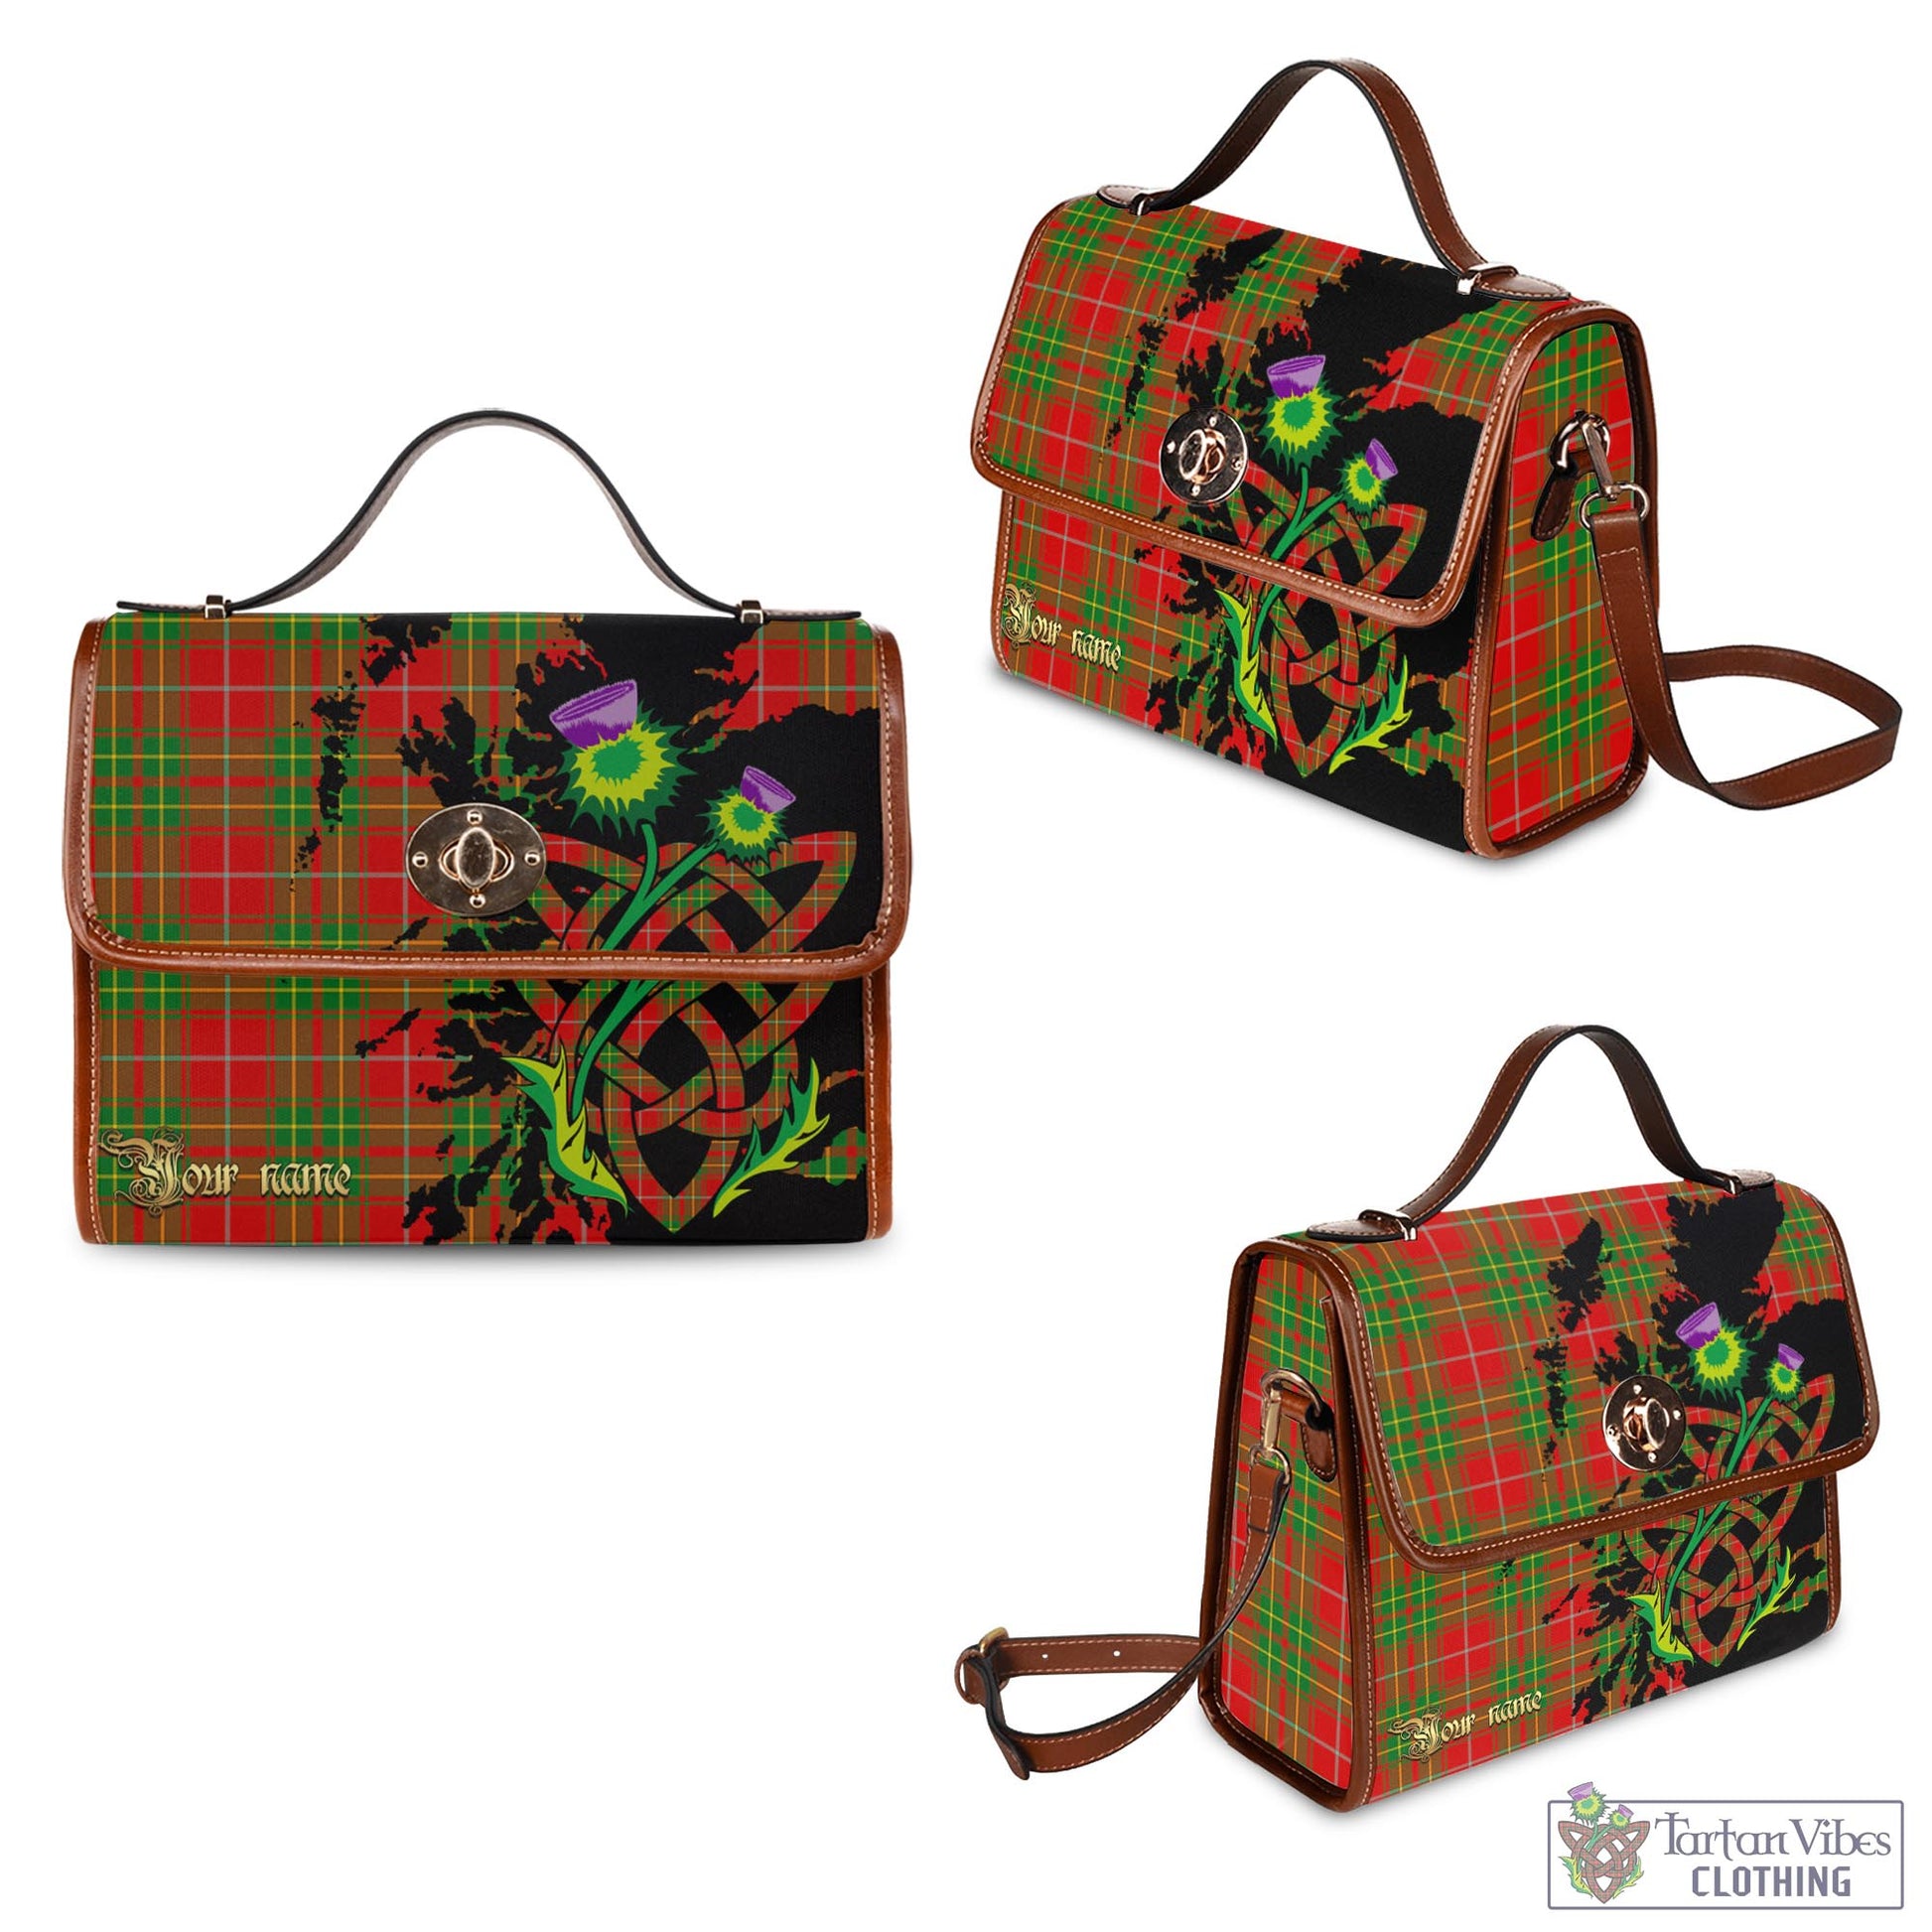 Tartan Vibes Clothing Burnett Ancient Tartan Waterproof Canvas Bag with Scotland Map and Thistle Celtic Accents